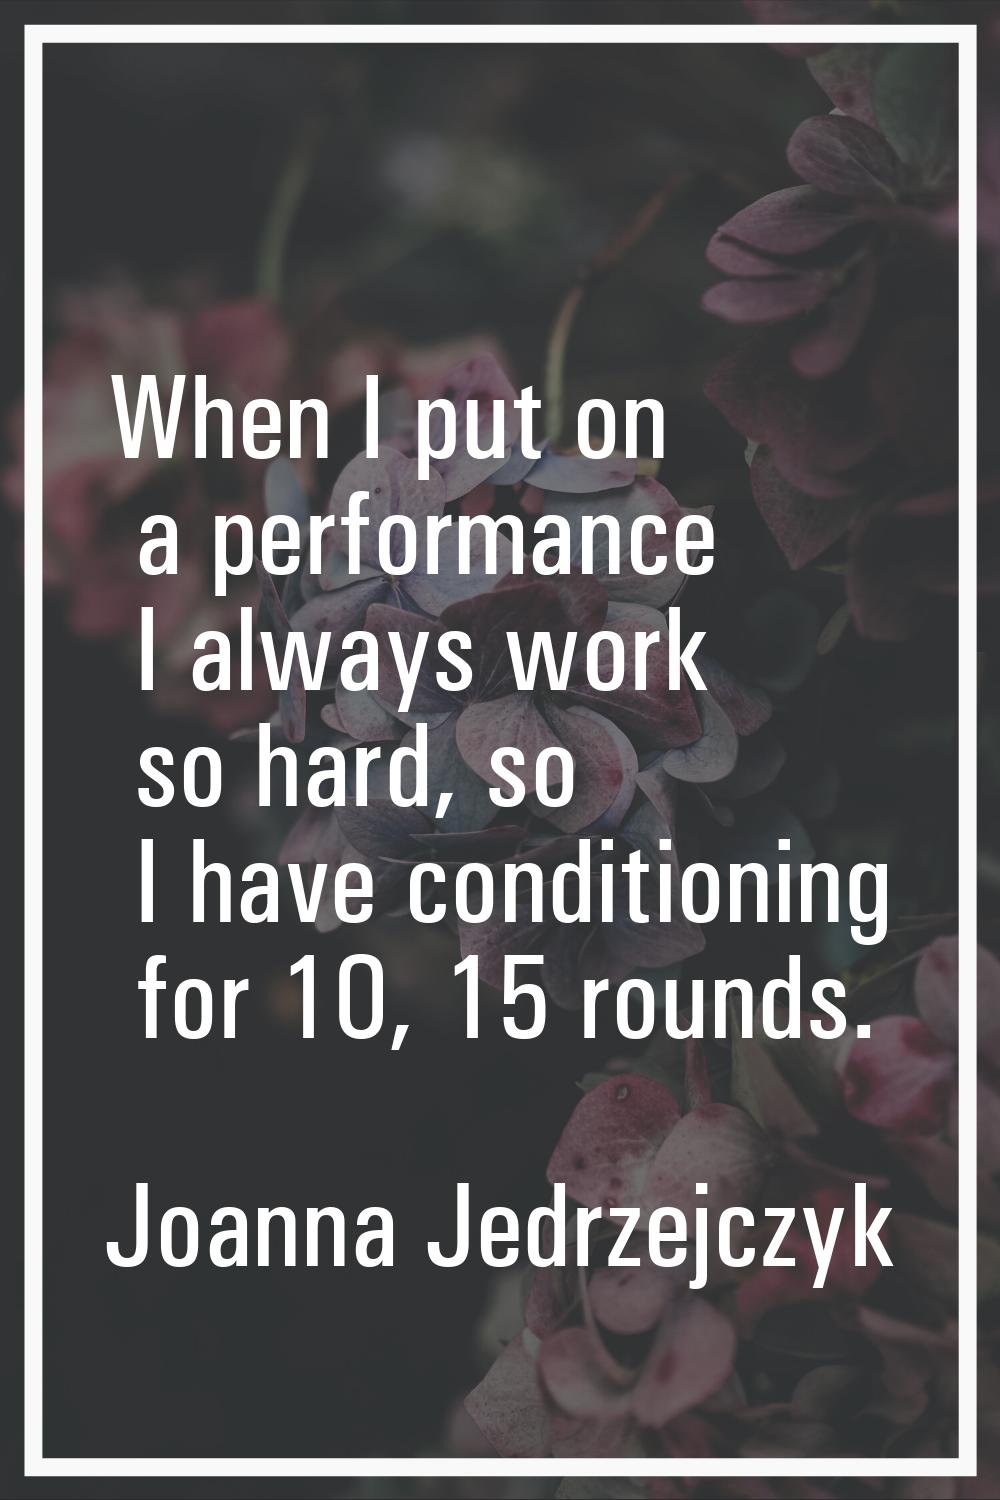 When I put on a performance I always work so hard, so I have conditioning for 10, 15 rounds.